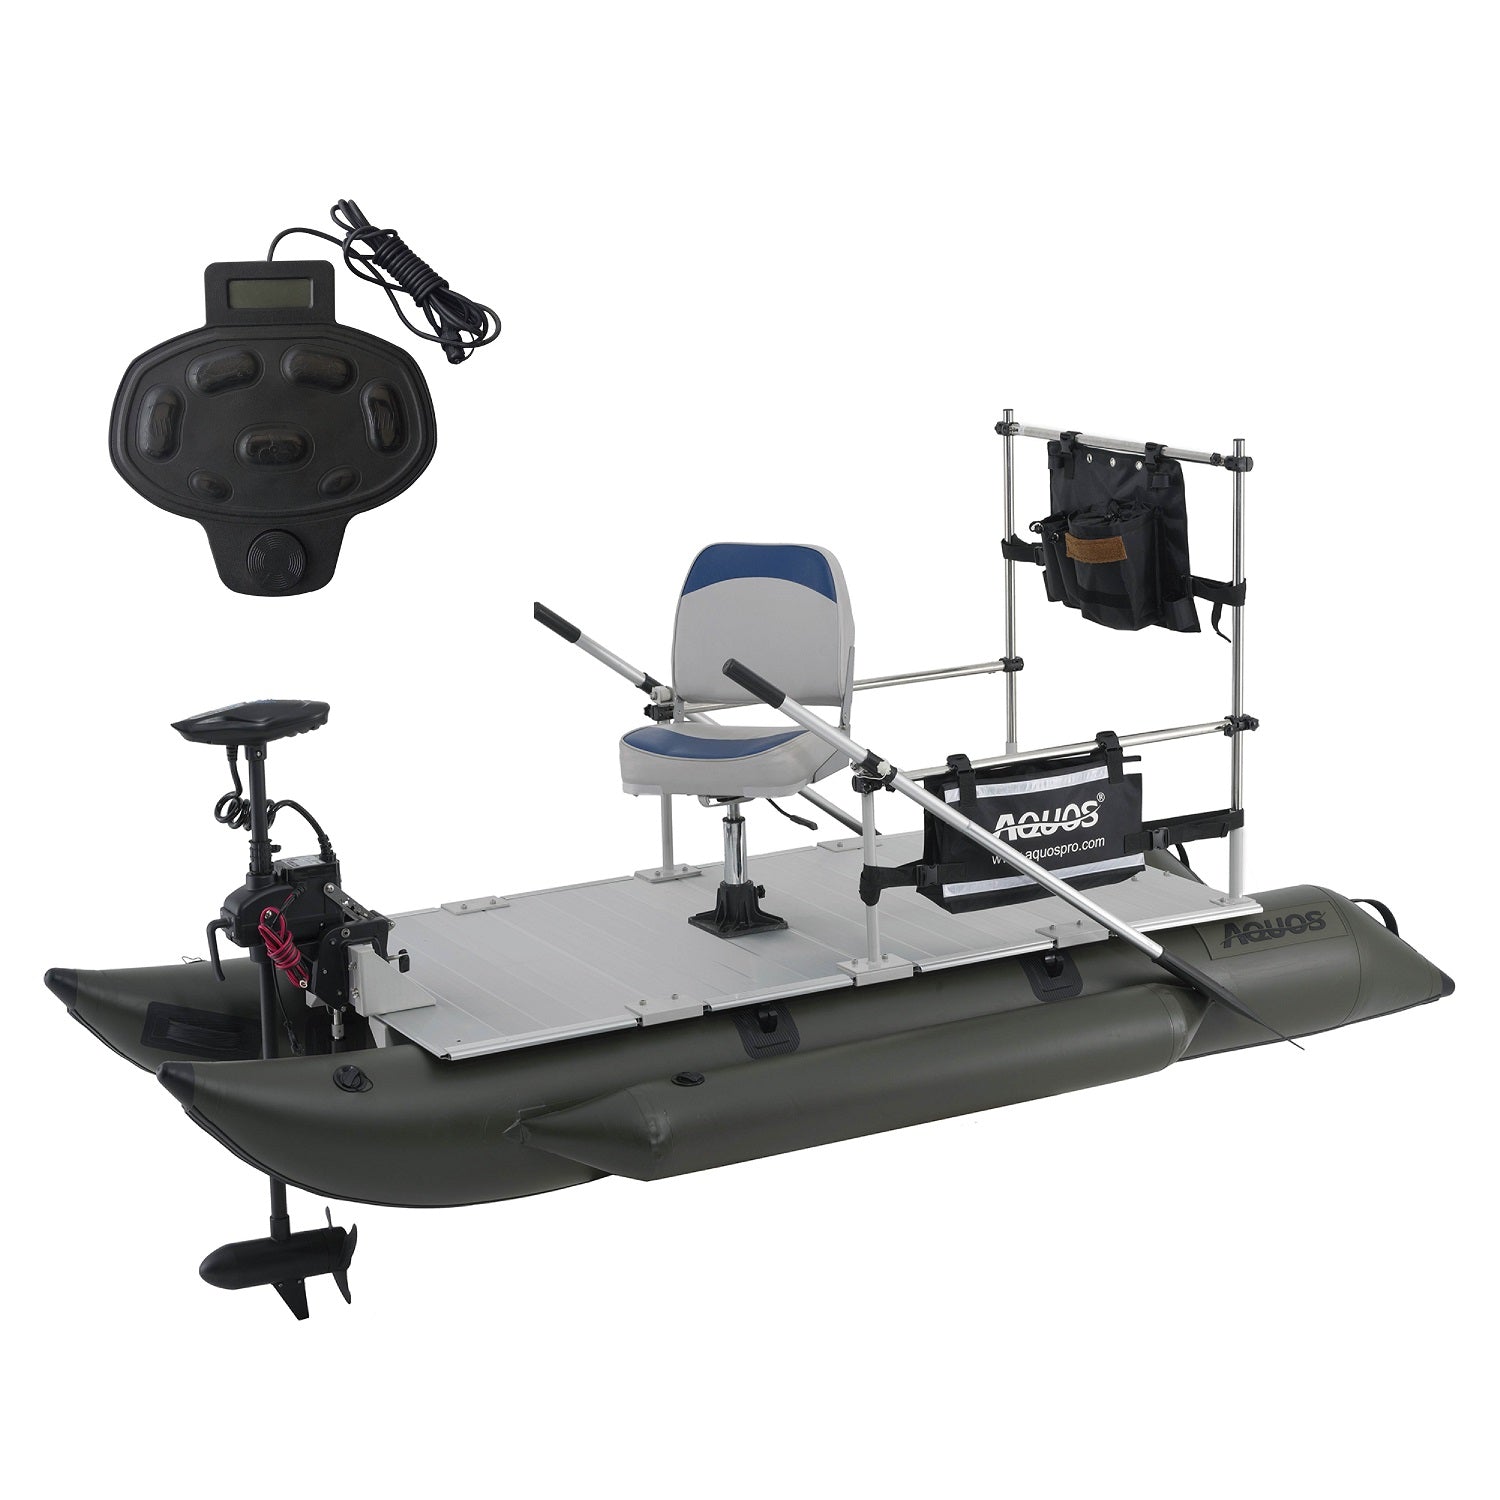 AQUOS New Heavy-Duty for One Series 8.8plus ft Inflatable Pontoon Boat with Haswing Bow Mount 12V 55LBS Remote Control Trolling Motor and Foot Control